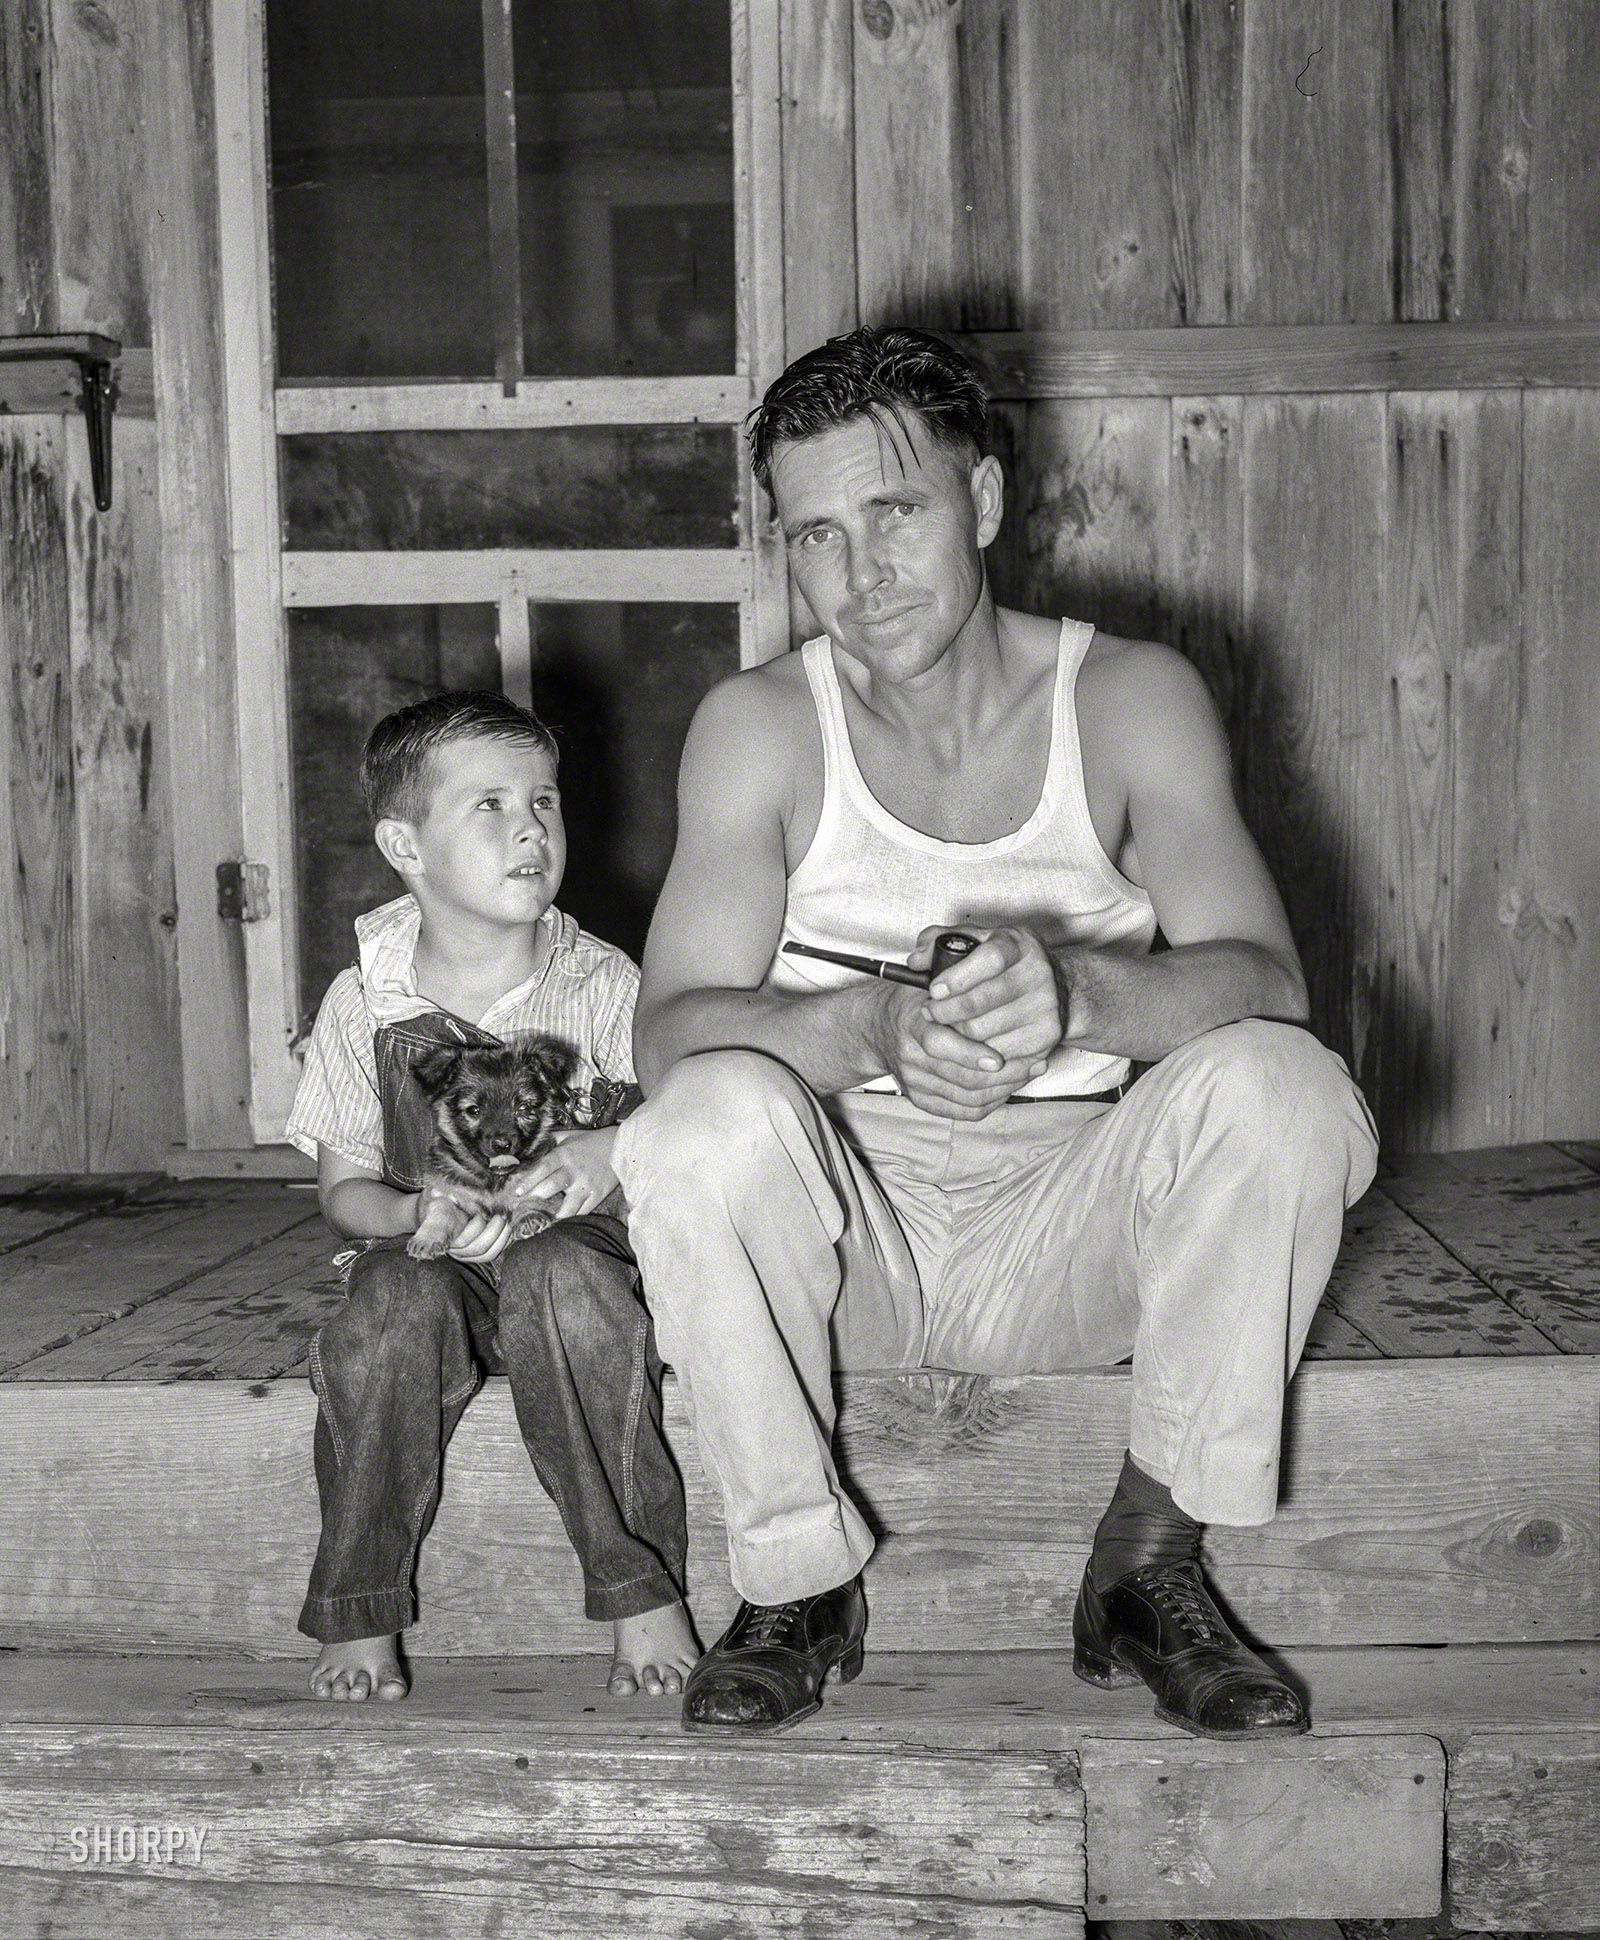 August 1939. "Oilfield truck driver and his son sitting on front porch. Seminole, Oklahoma." Happy Father's Day from Shorpy! Medium format negative by Russell Lee for the Farm Security Administration. View full size.